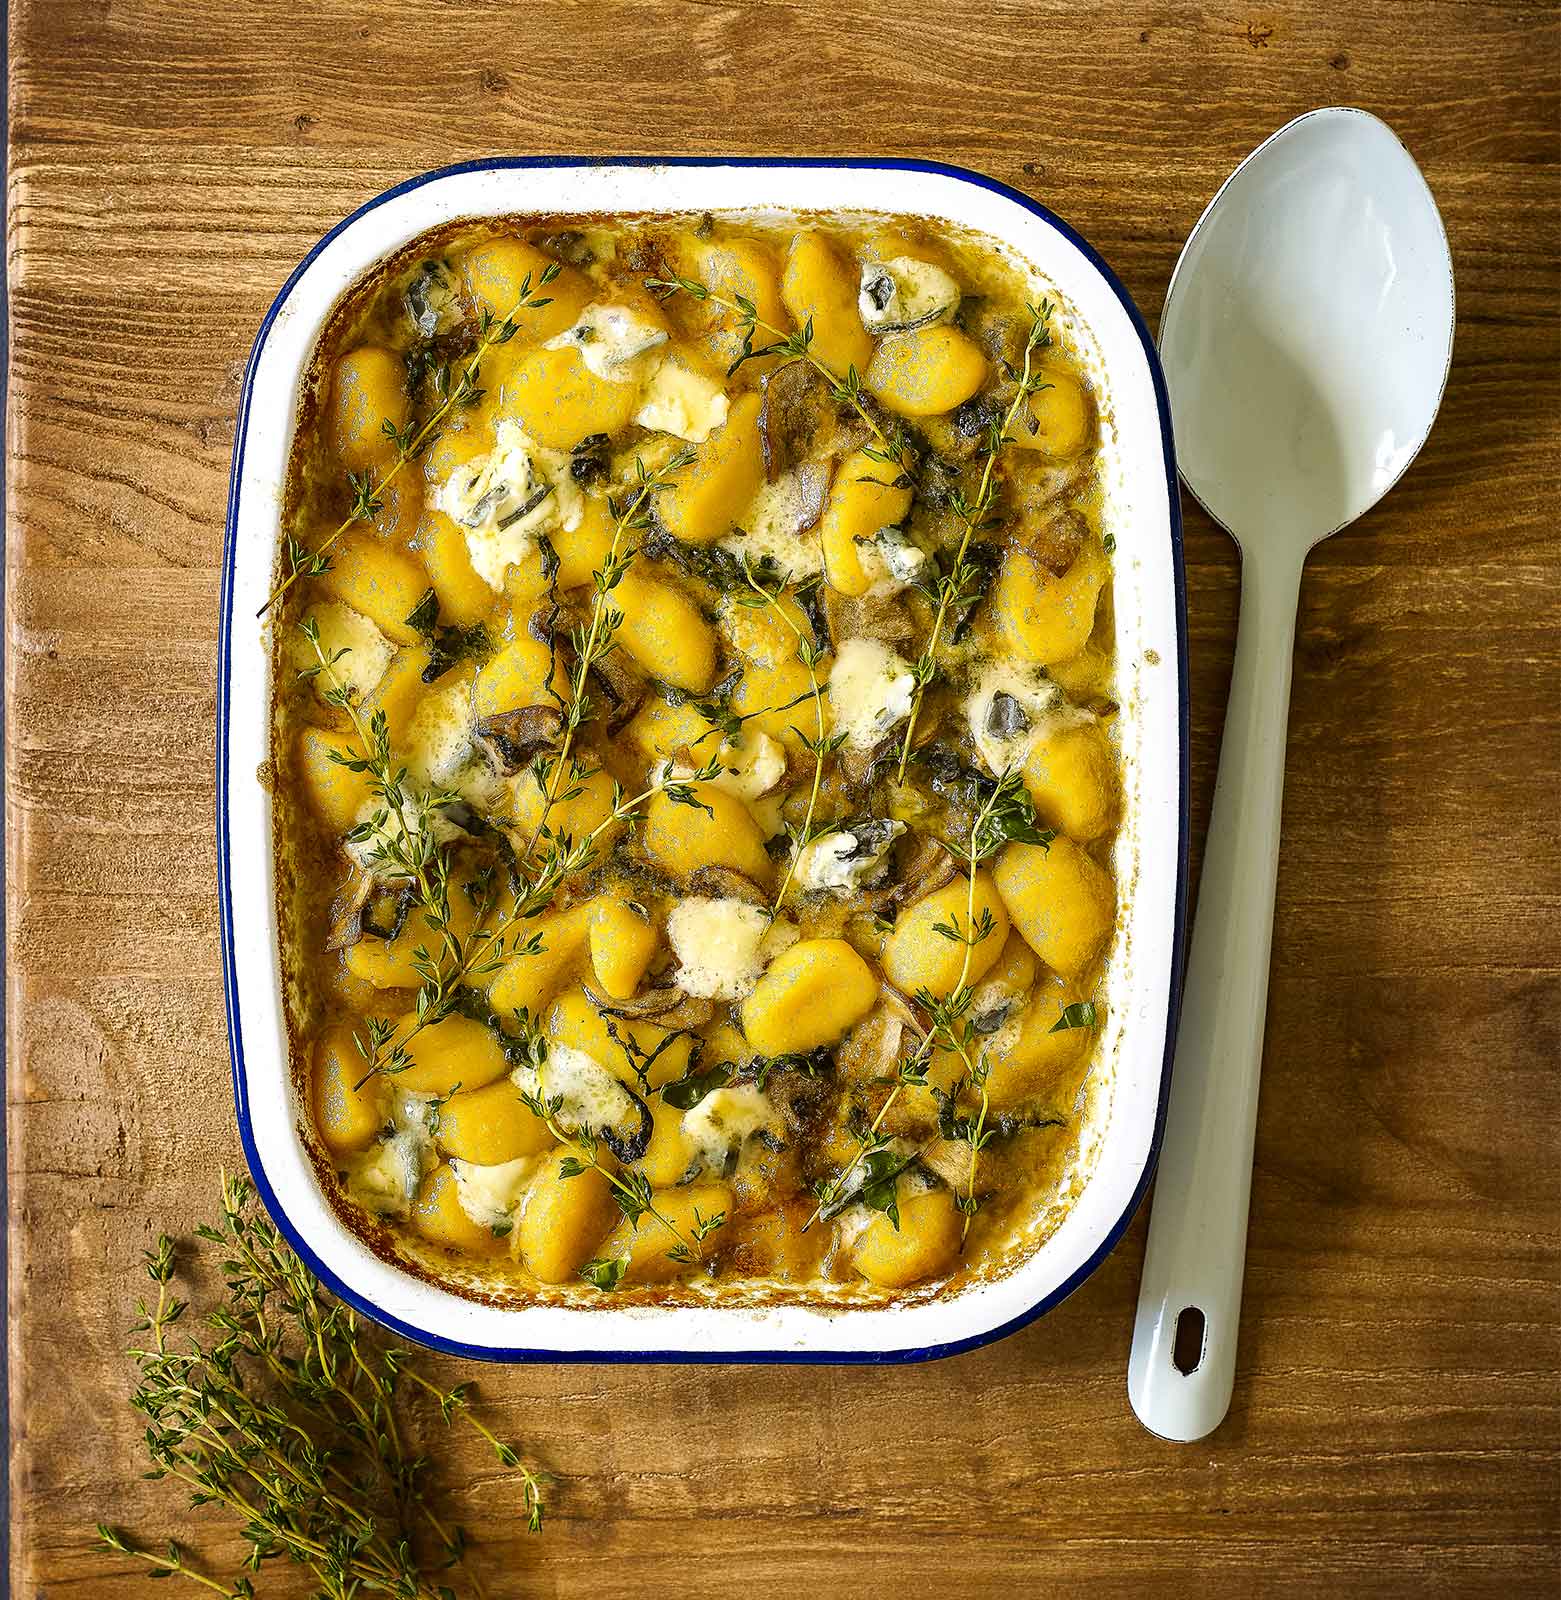 An enamel baking dish filled with gluten-free baked blue cheese gnocchi and topped with lemon thympe. A serving spoon sits to the right ready to serve.